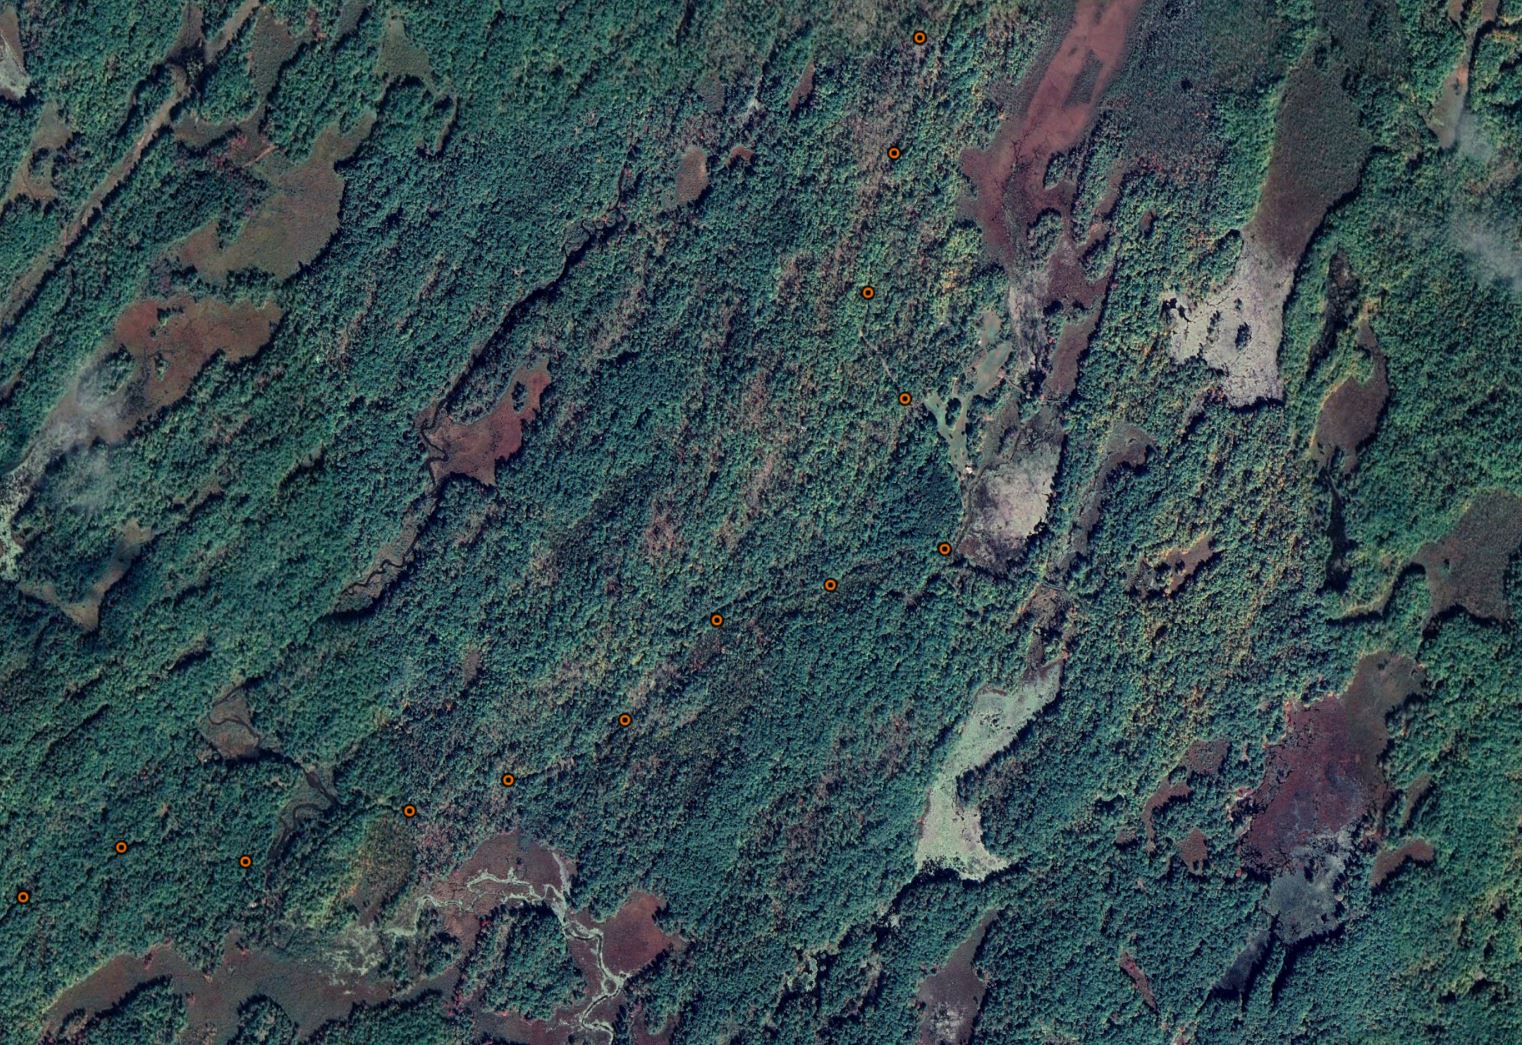 Precambrian terrain in central Ontario showing broadcast locations on a fire route